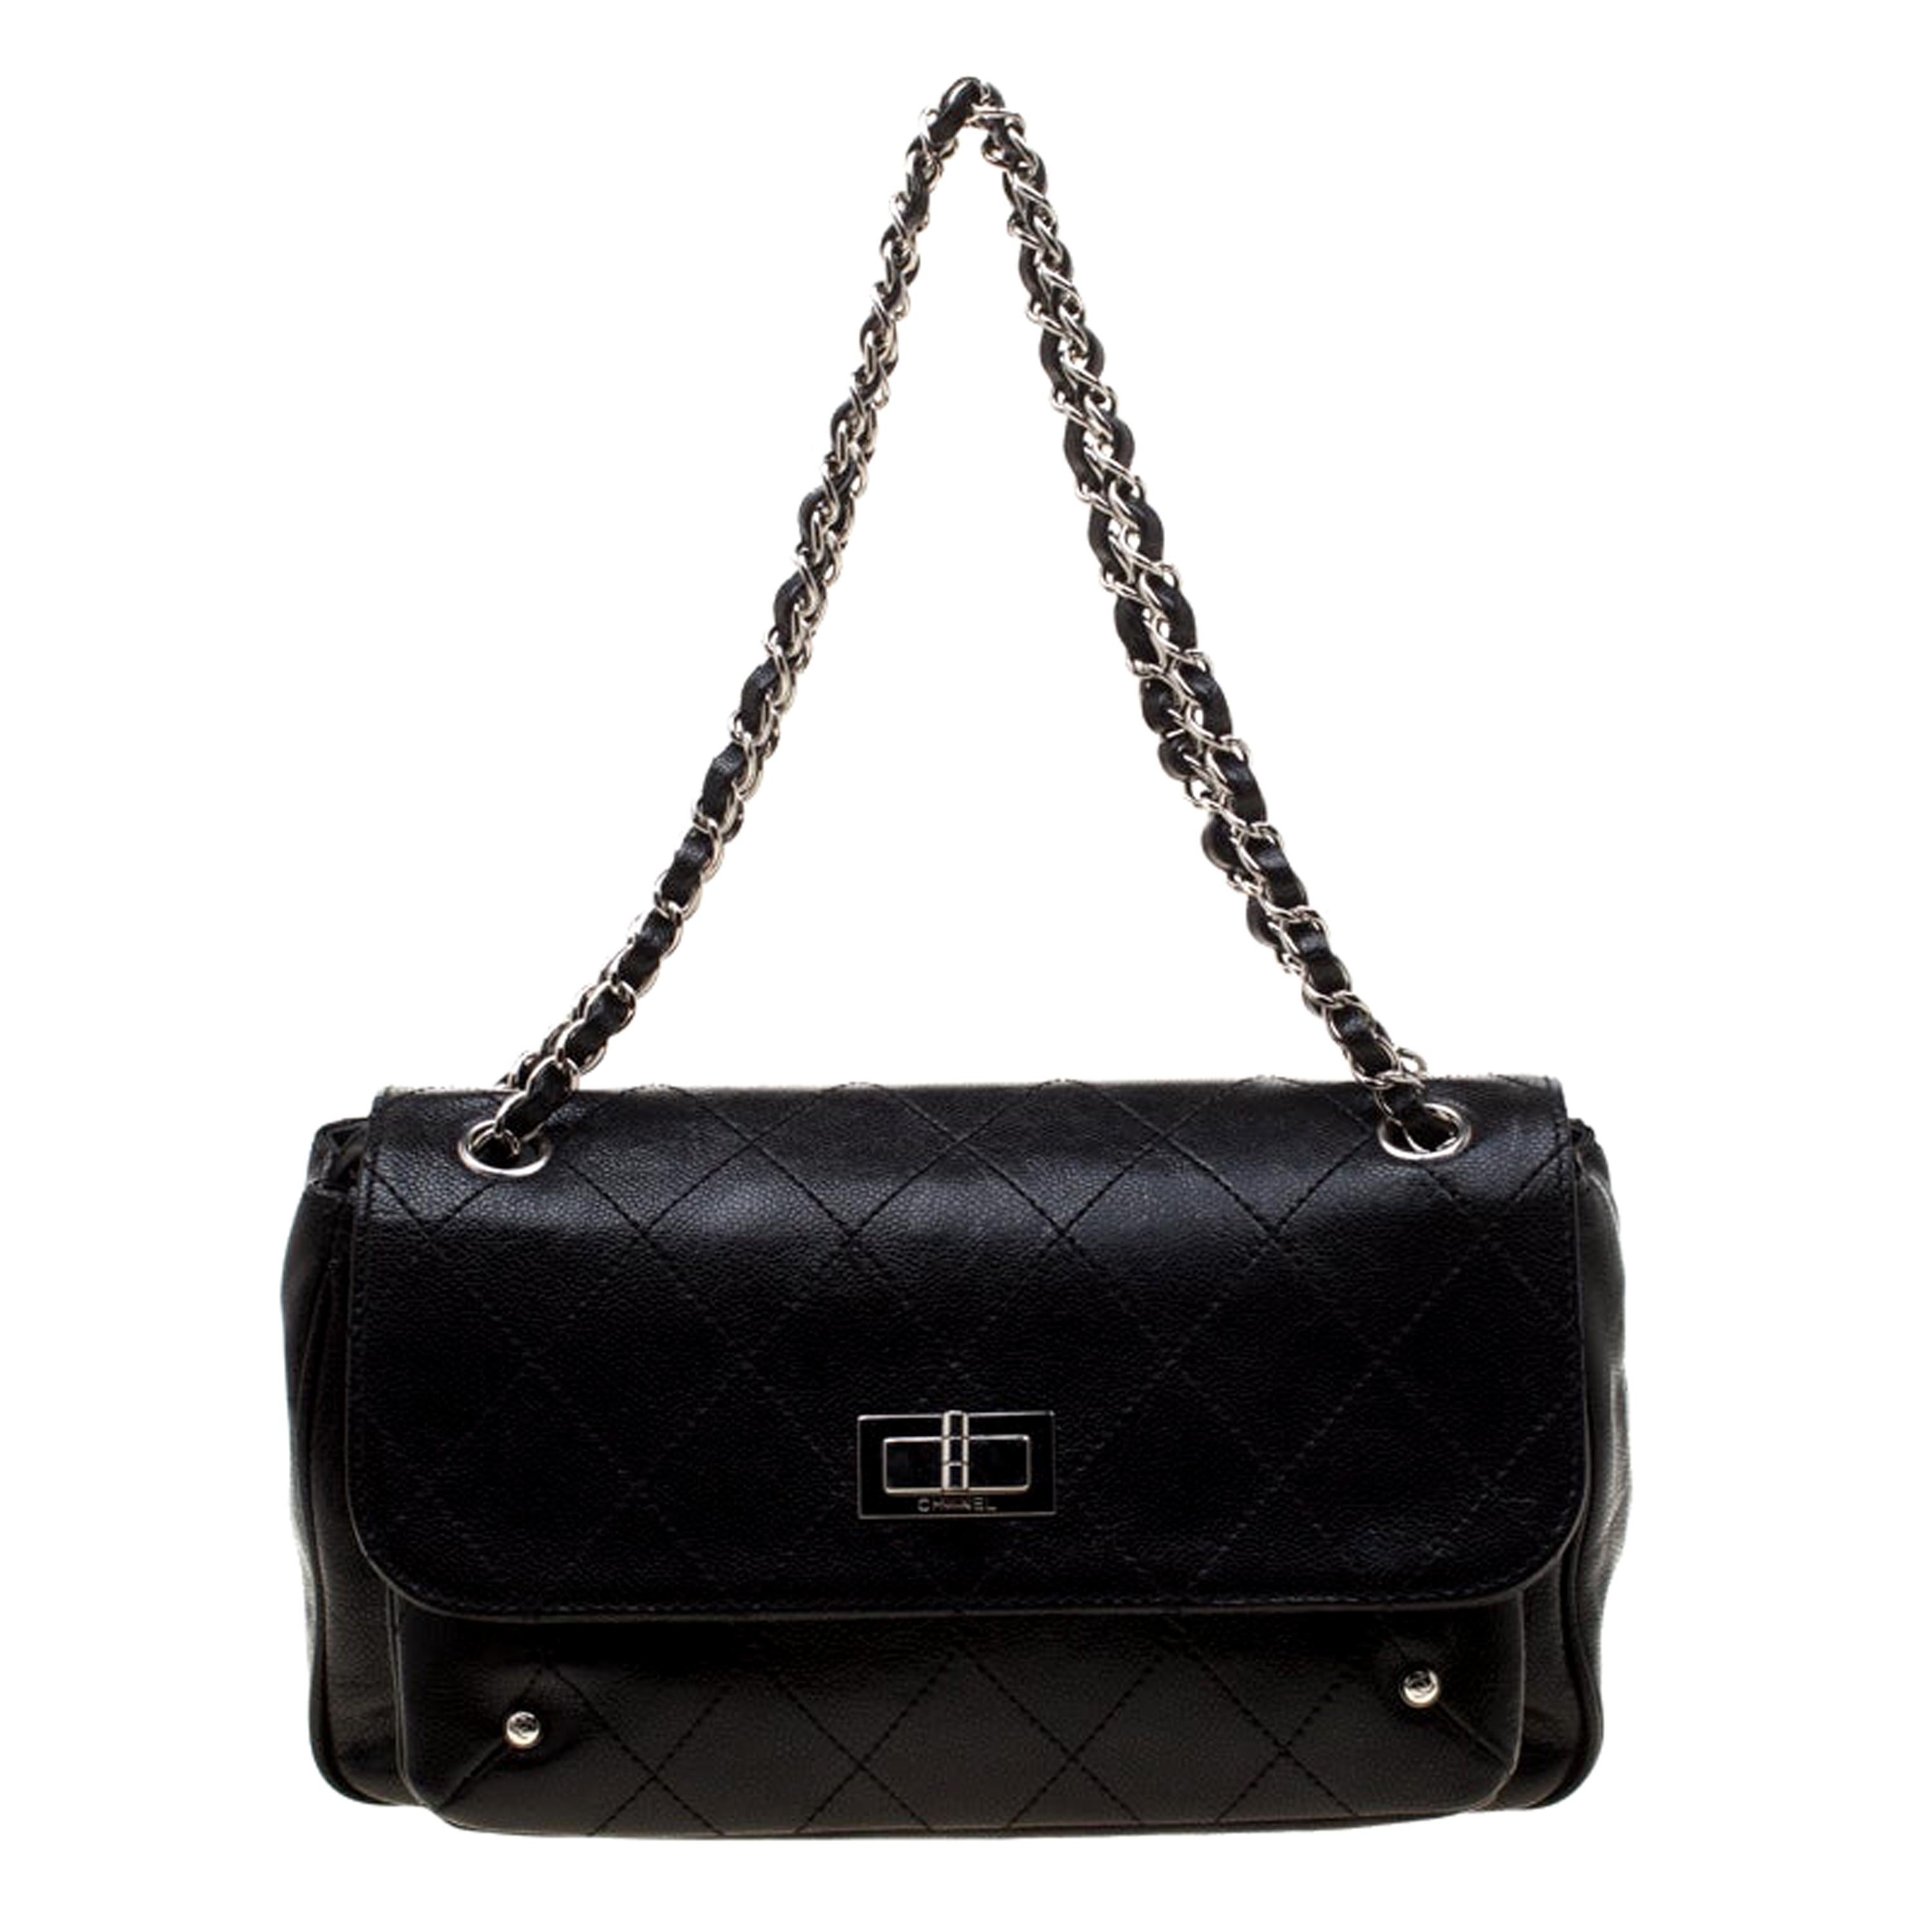 Chanel Black Quilted Caviar Leather Reissue Shoulder Bag